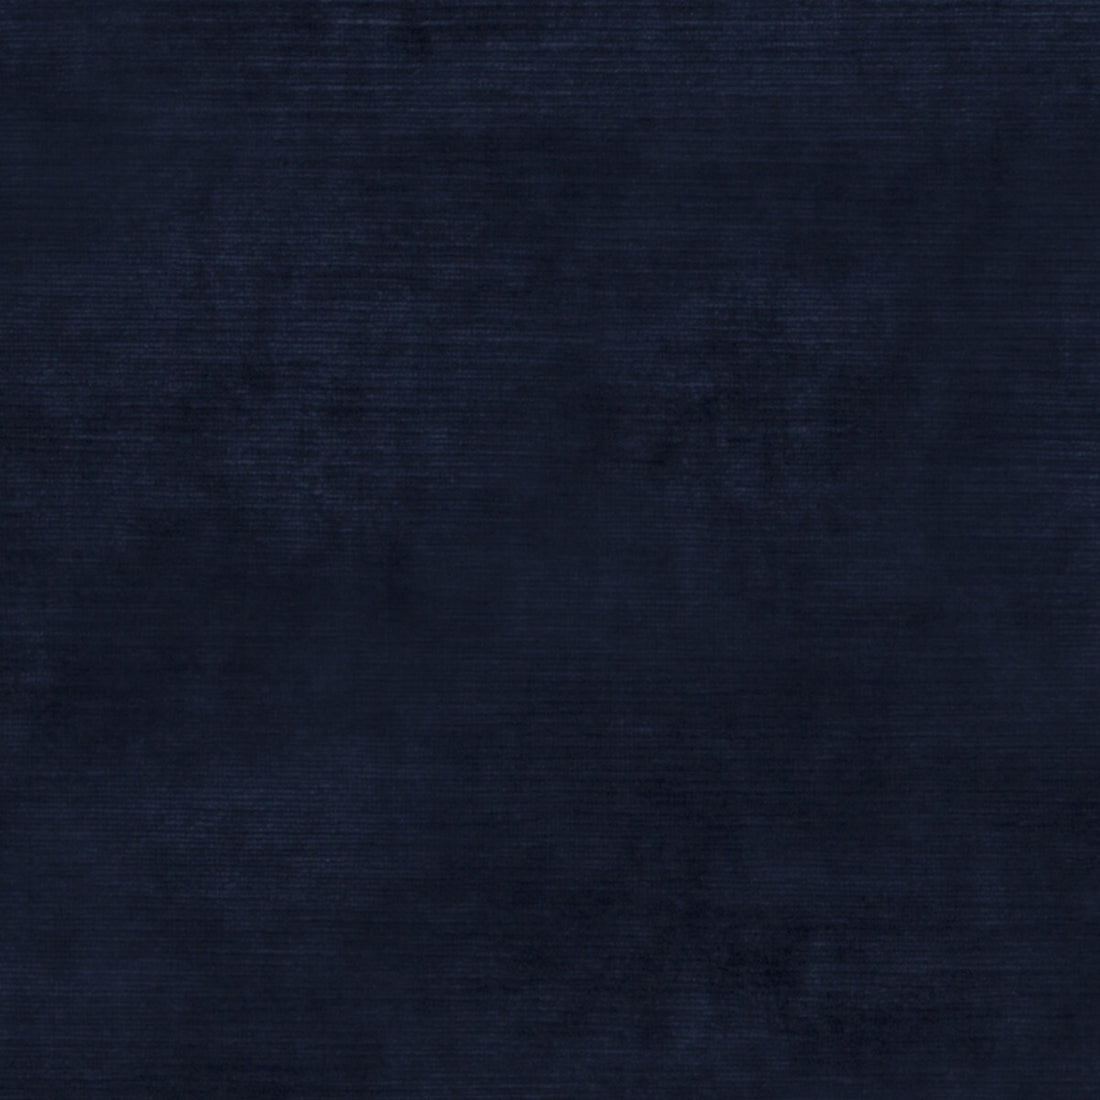 Meridian Velvet fabric in indigo color - pattern ED85292.680.0 - by Threads in the Meridian collection